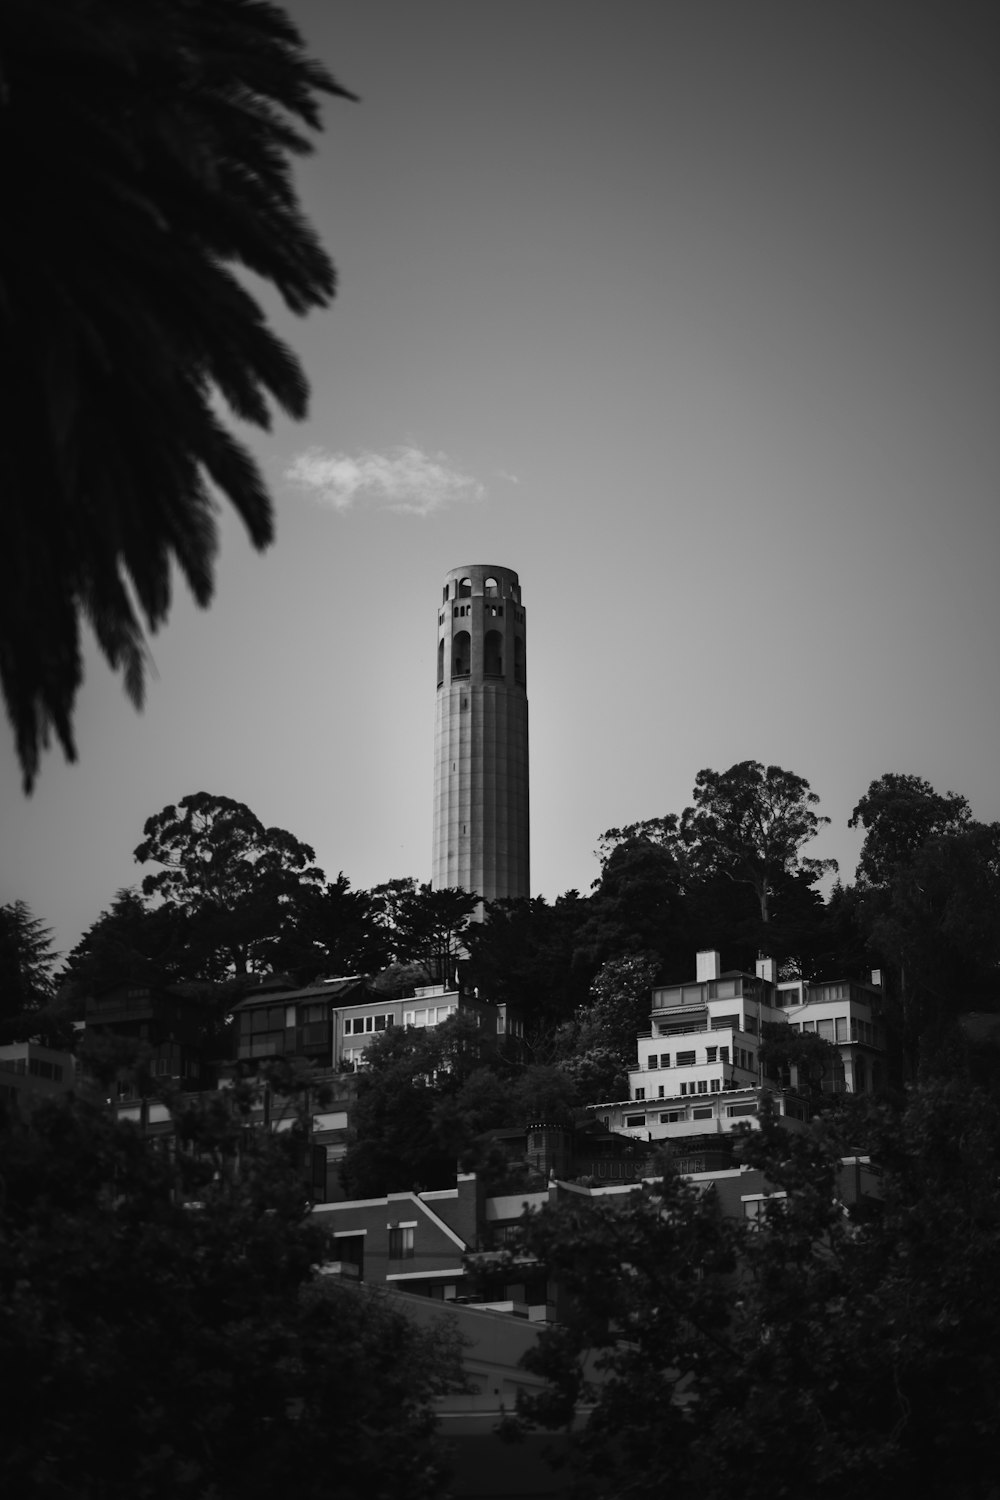 a black and white photo of a clock tower photo – Free Grey Image on Unsplash